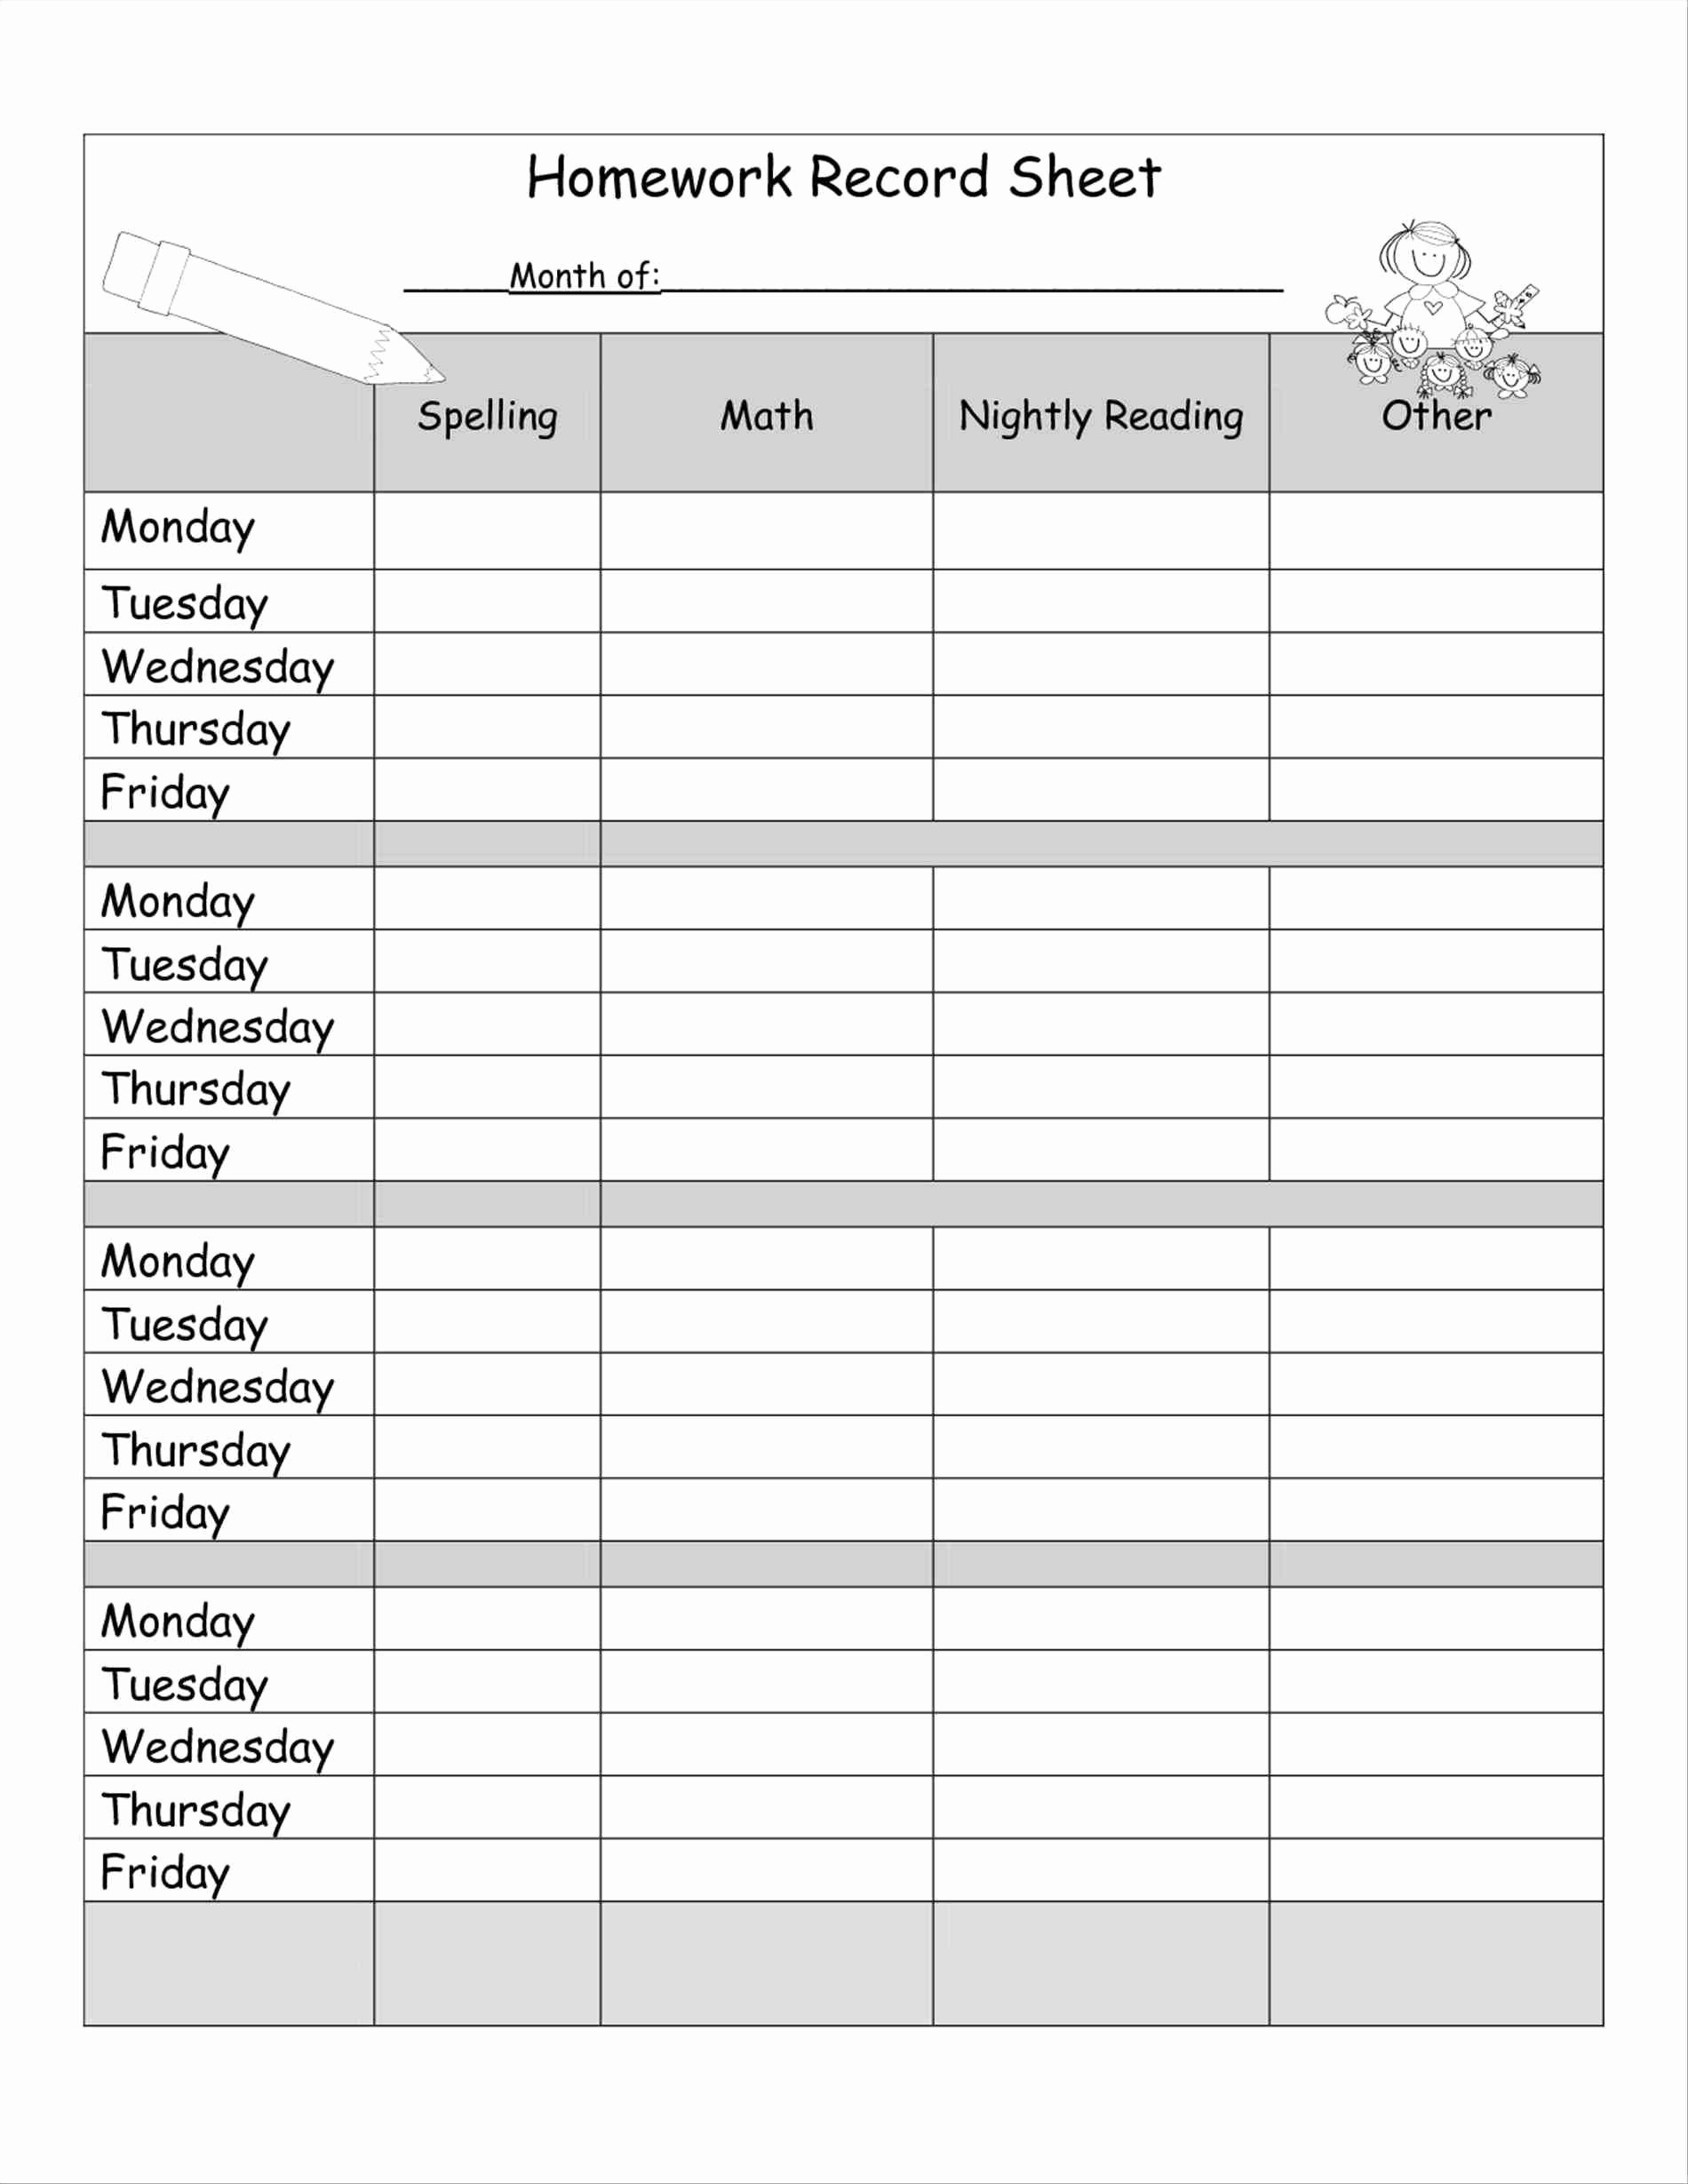 Assignment Sheet Template Beautiful Student assignment Planner Line for Free